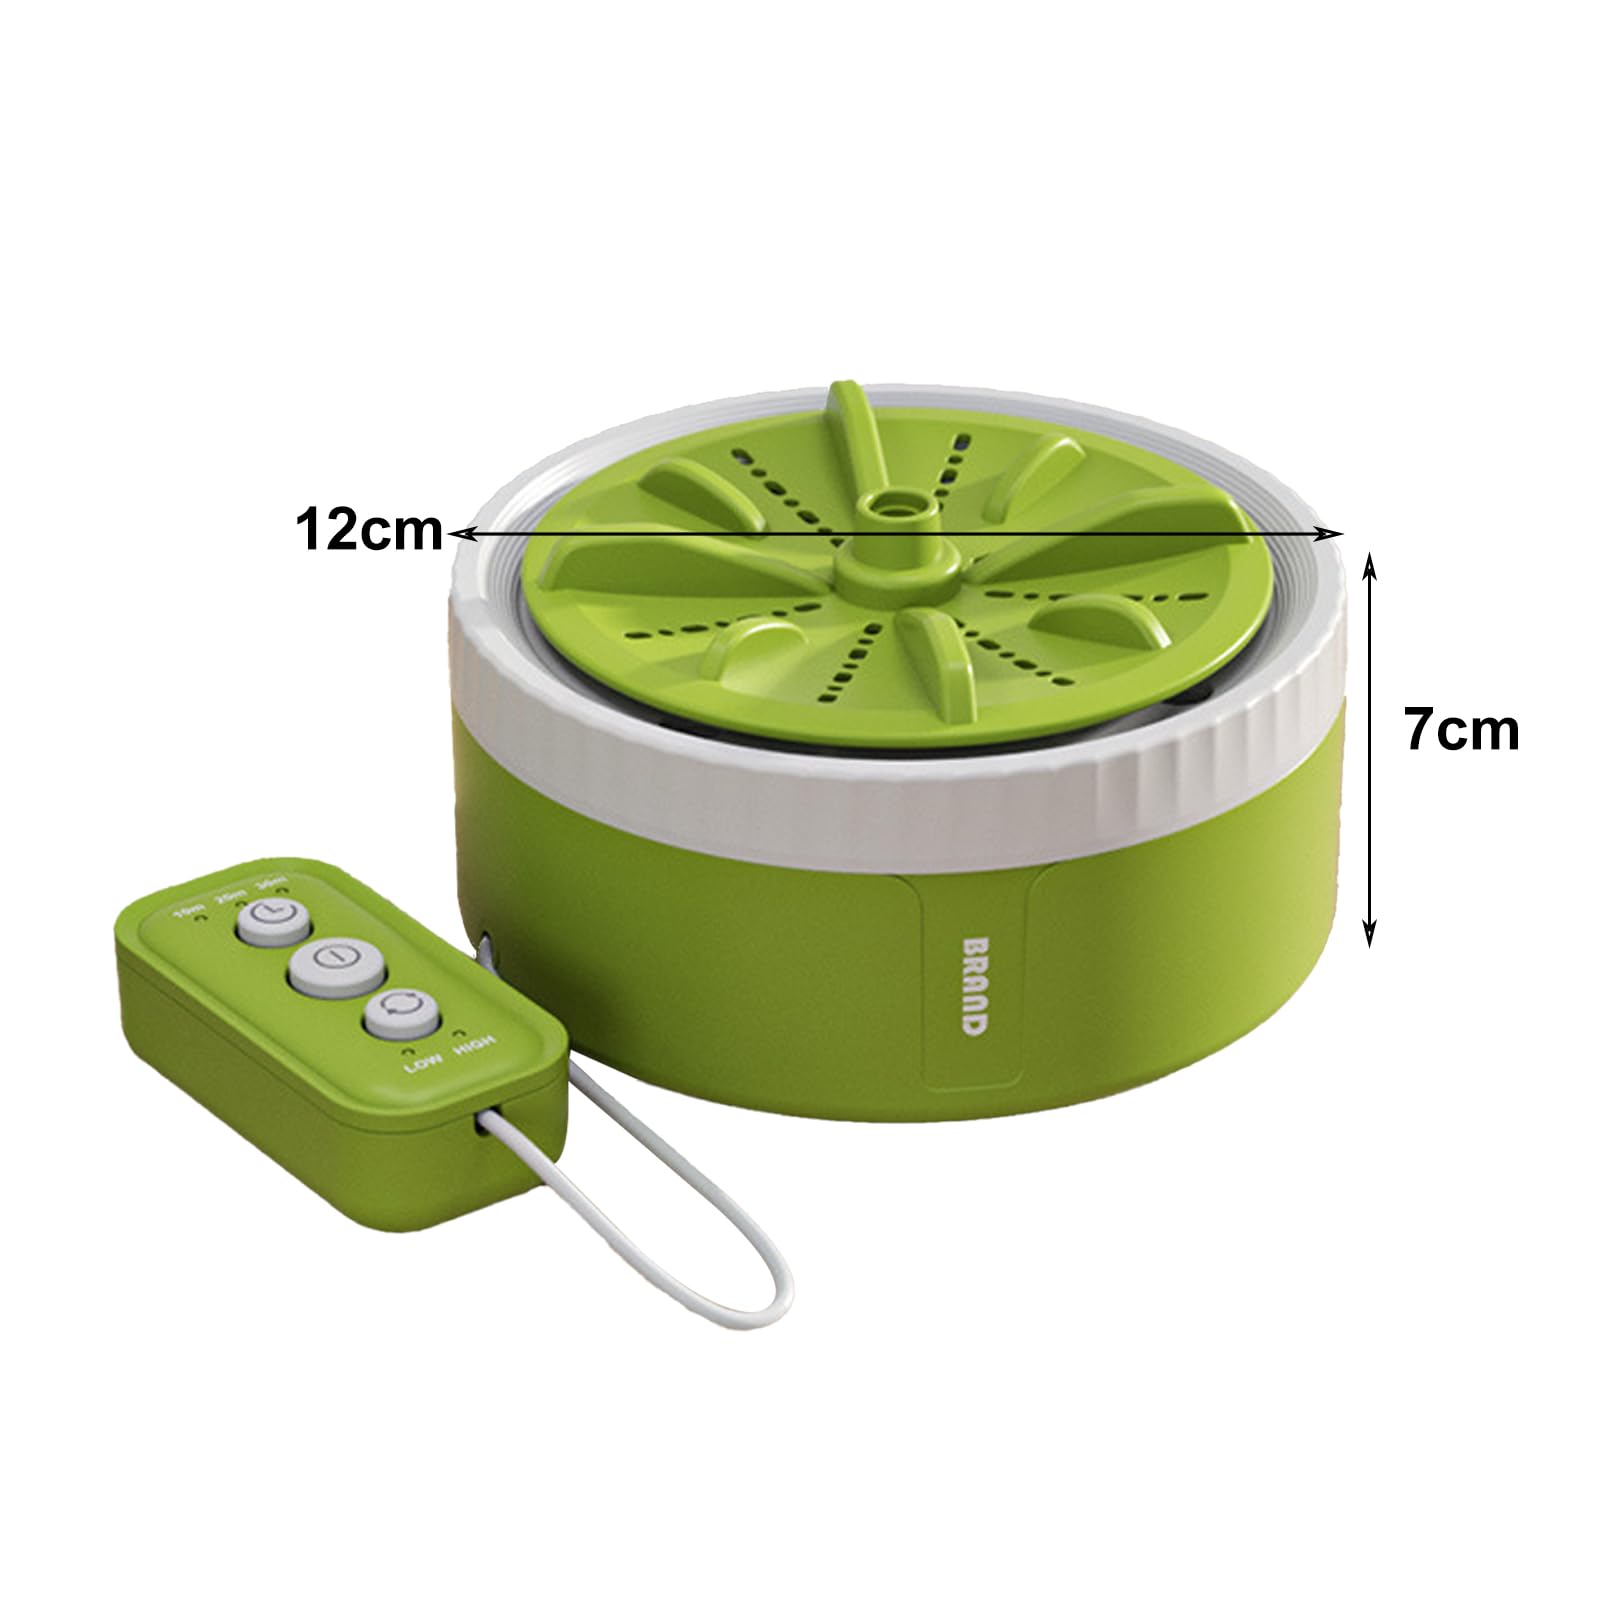 Fairnull Portable Mini Washing Machine, USB Powered Small Turbo Washing Machine and Dishwasher, Suitable for Travel,Business Trip, Home, Fruit Cleaning and Dish Washing (Green)